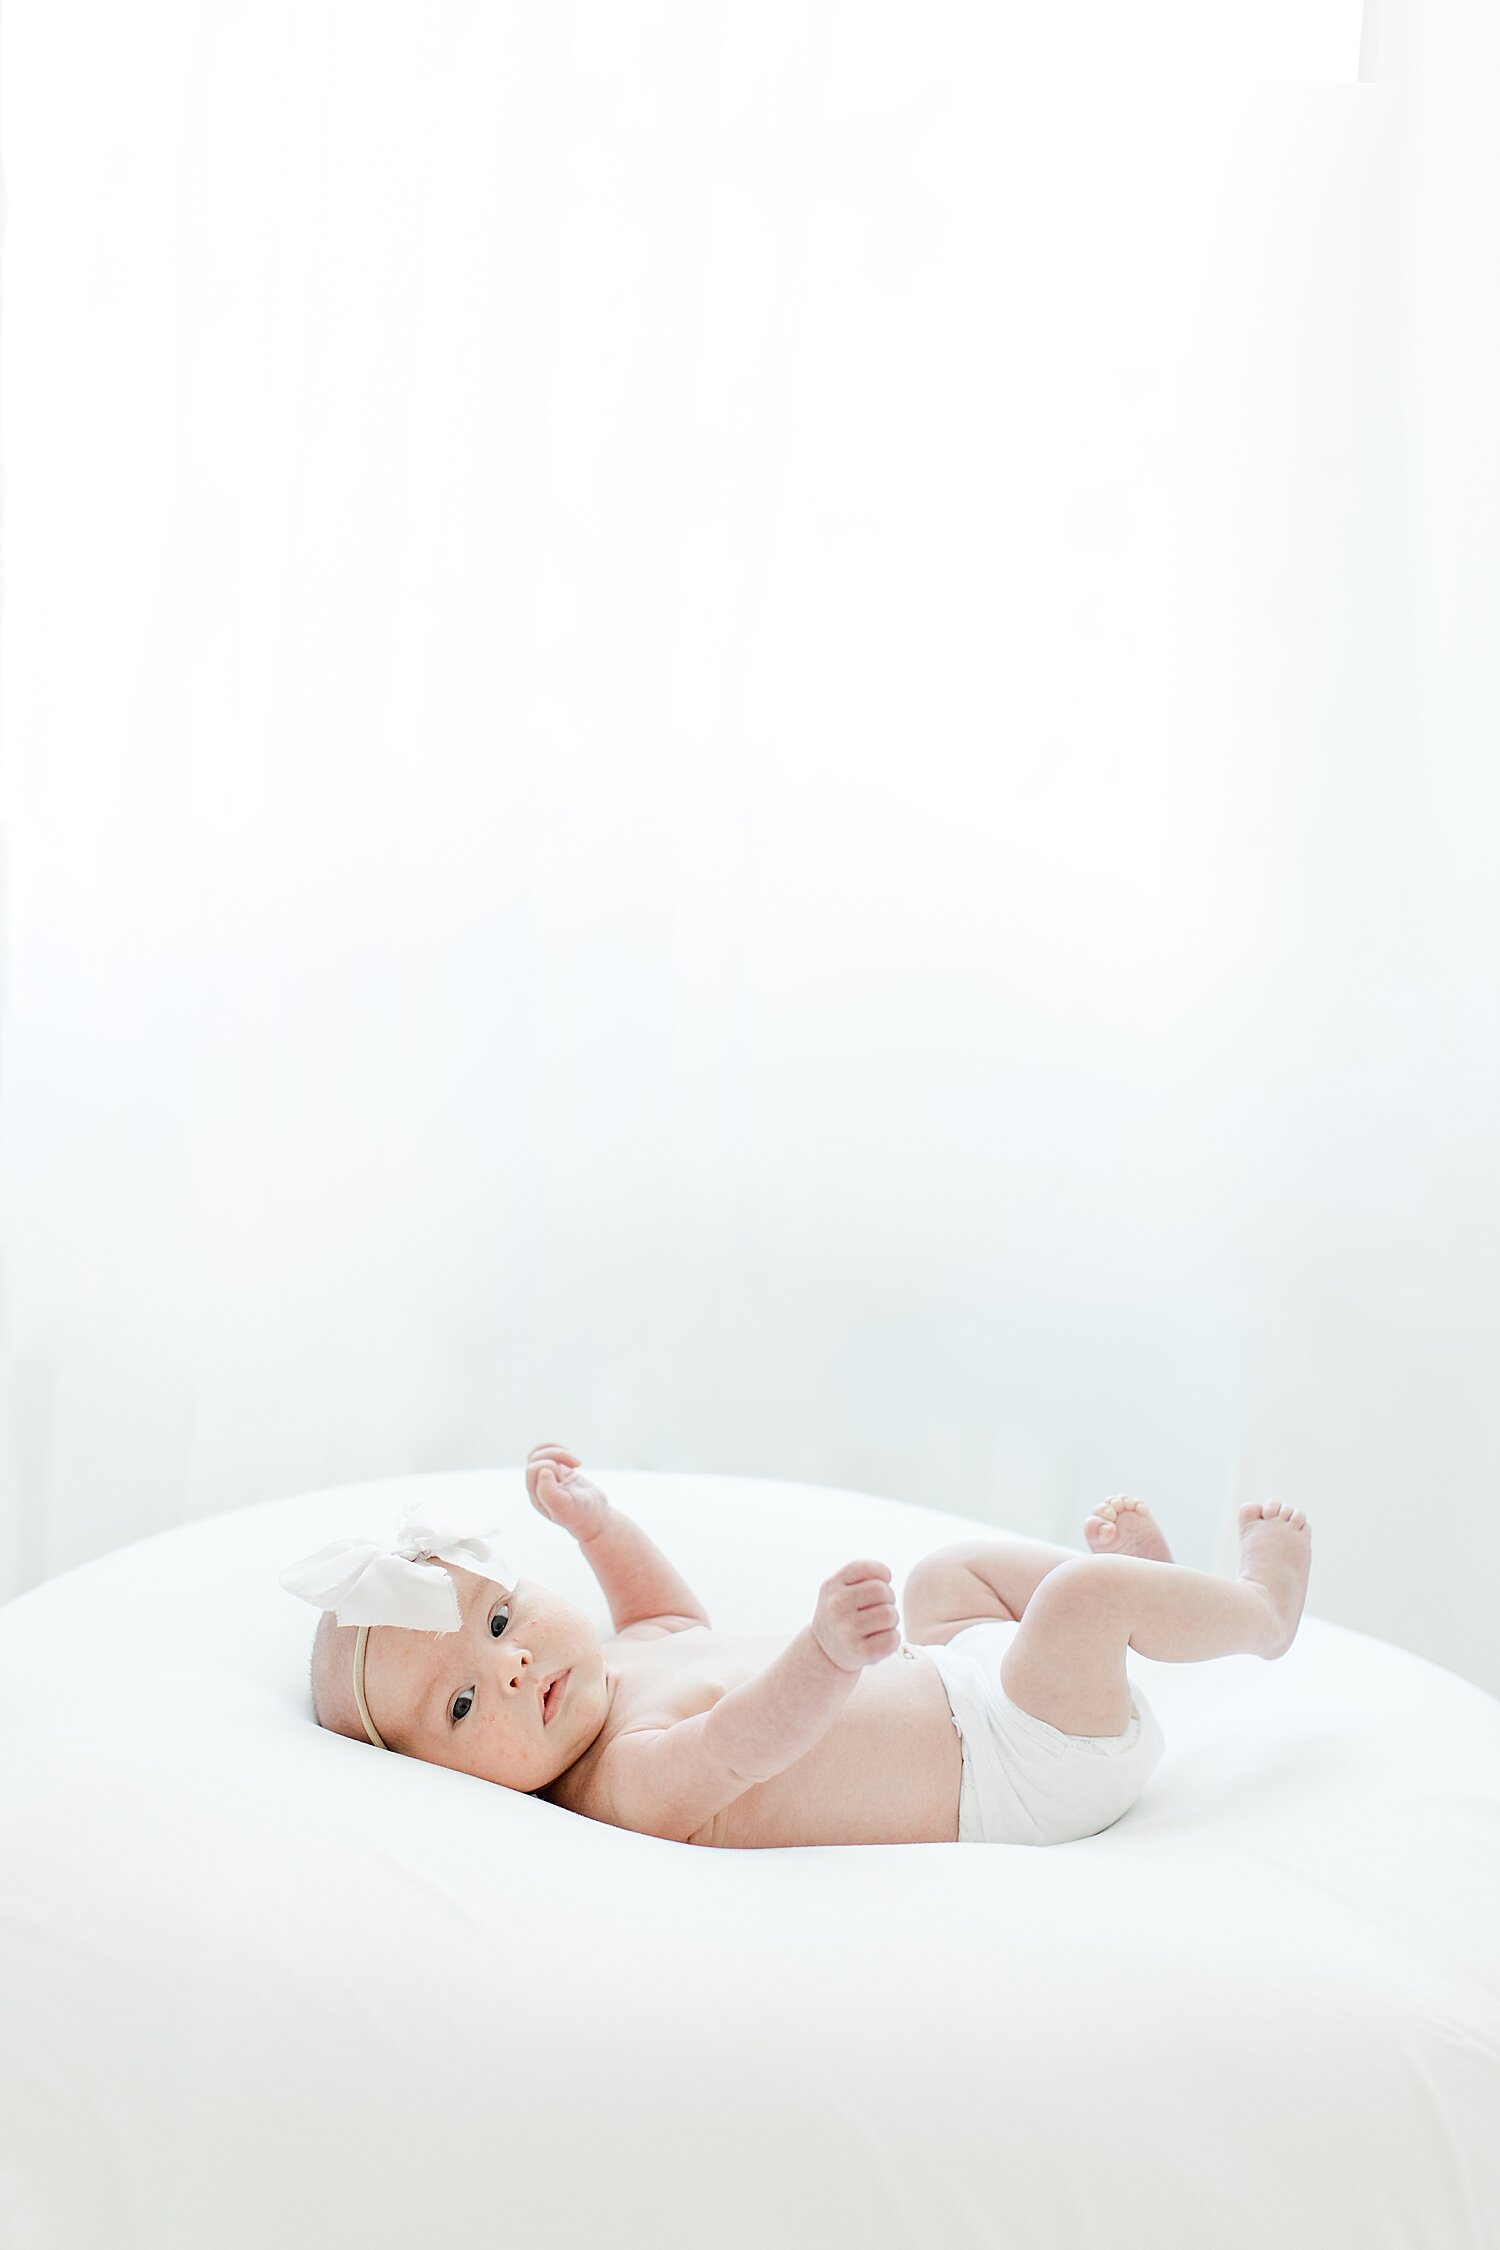 Baby Girl's Newborn Session in Studio in Fairfield County, CT | Kristin Wood Photography